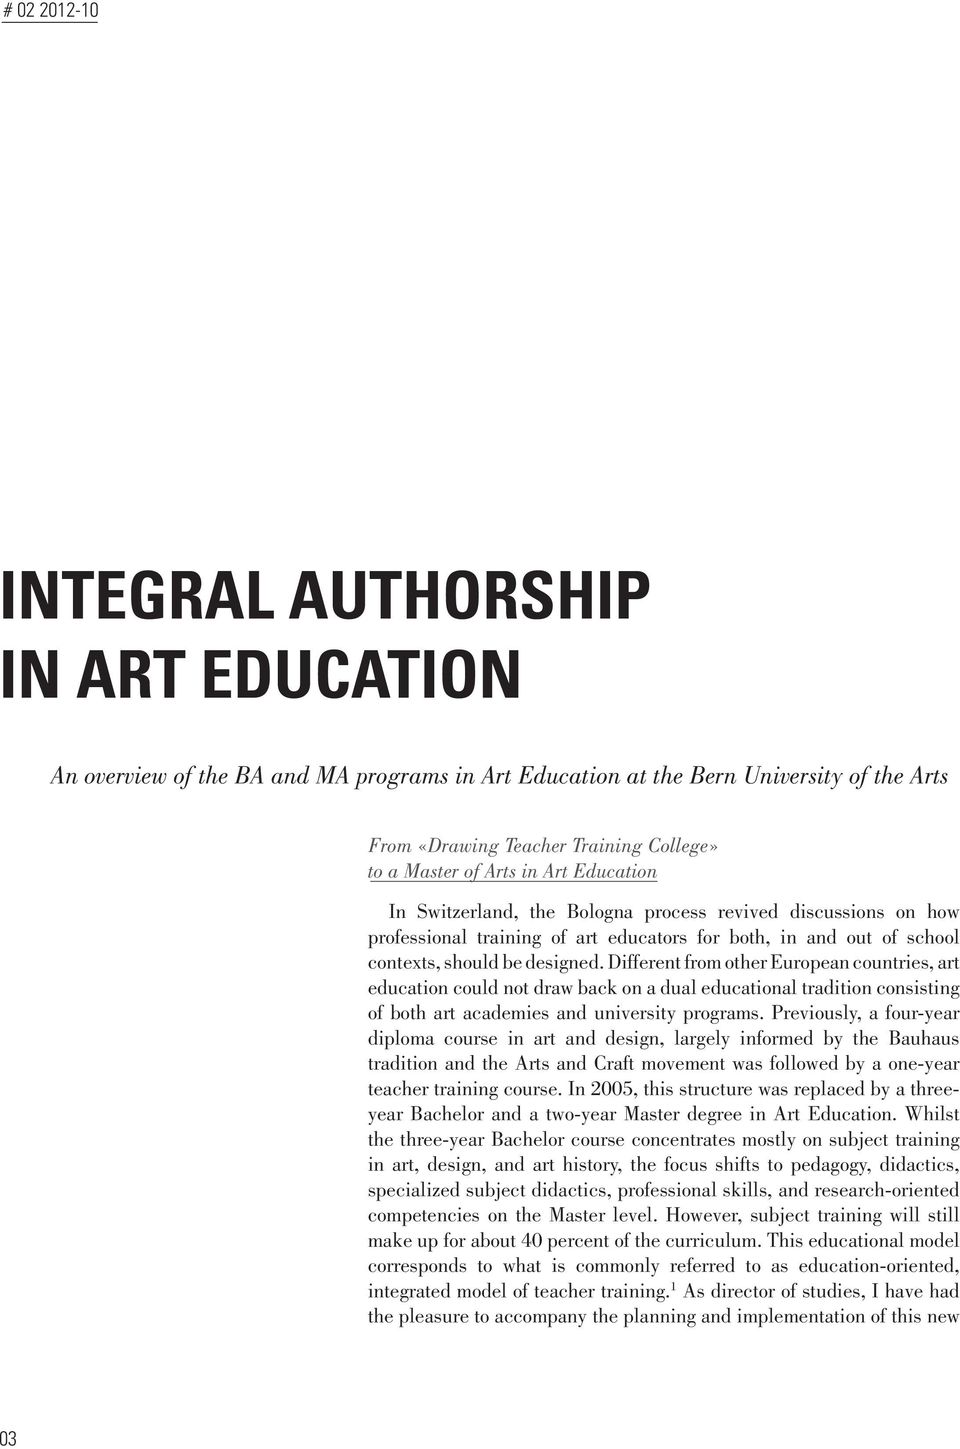 Different from other European countries, art education could not draw back on a dual educational tradition consisting of both art academies and university programs.